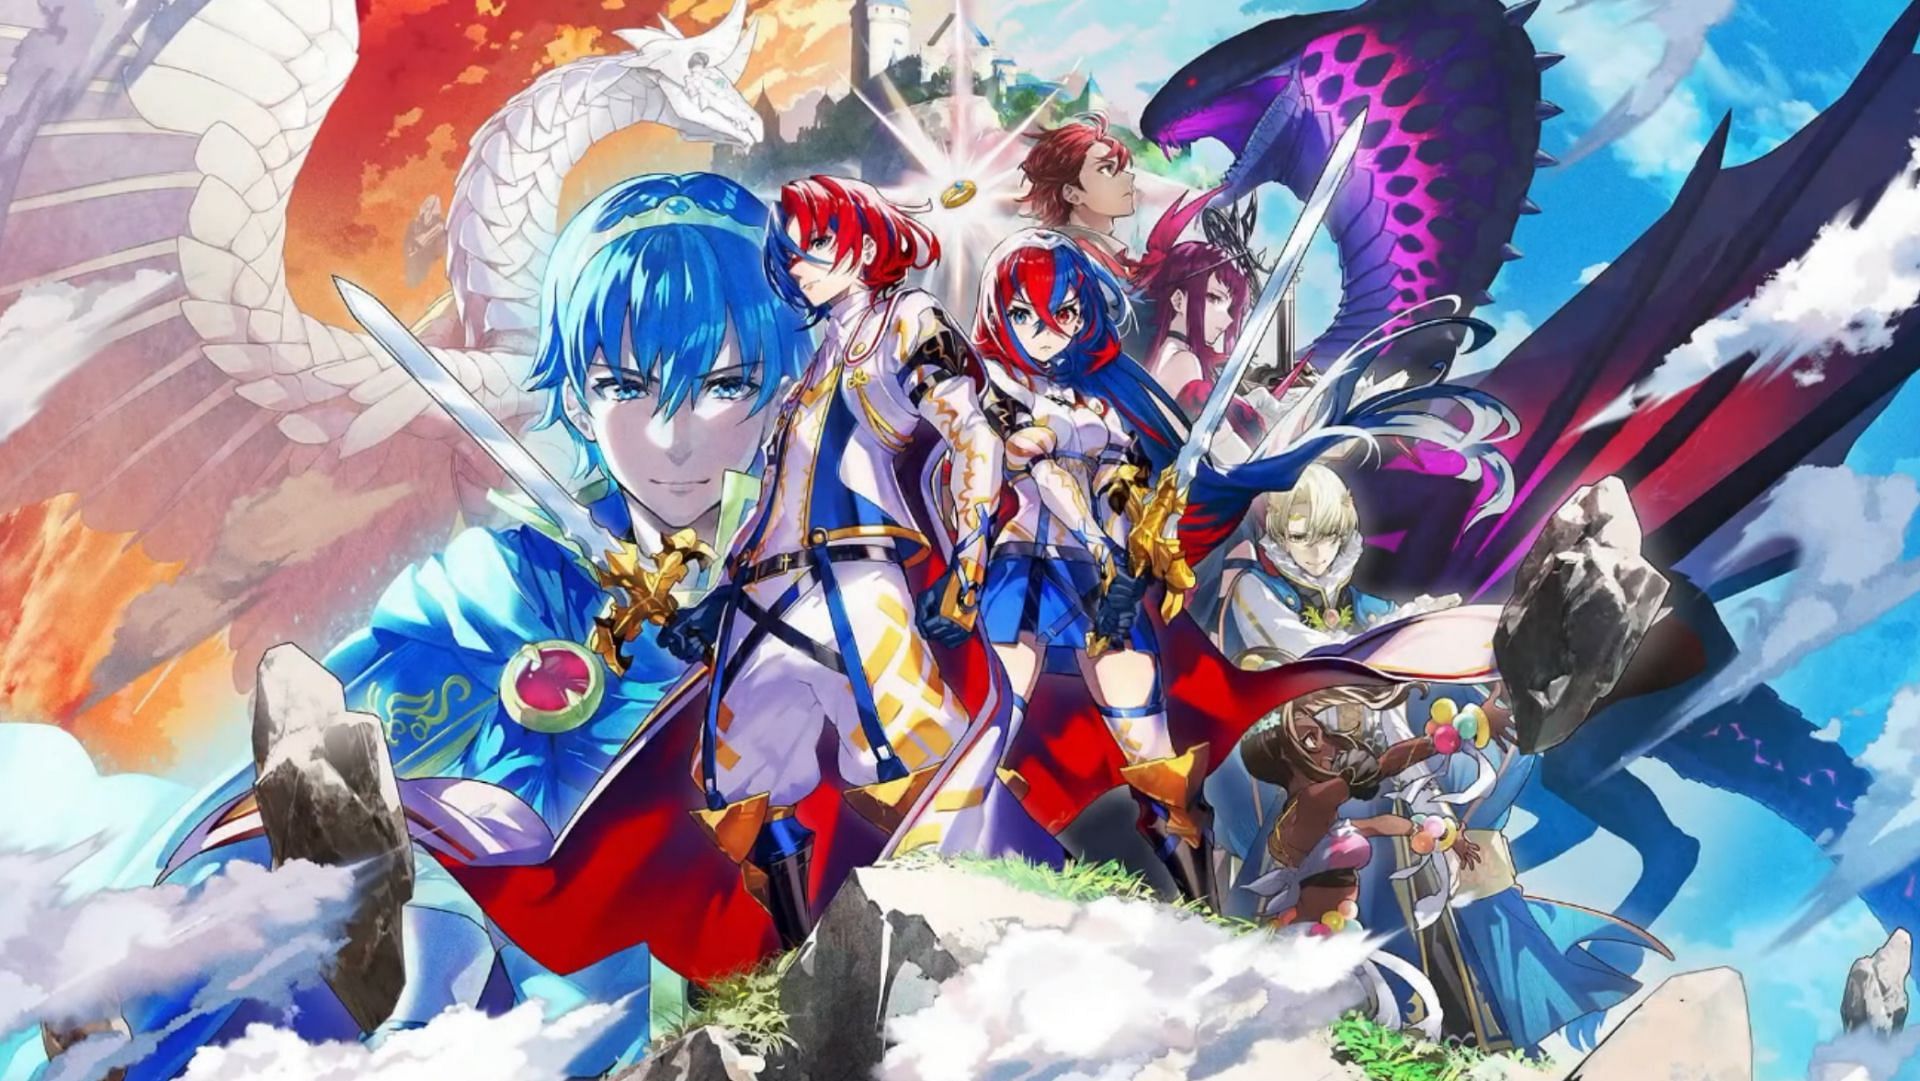 Fire Emblem Engage is confirmed for an early 2023 release on the Nintendo Switch (Image via Nintendo)